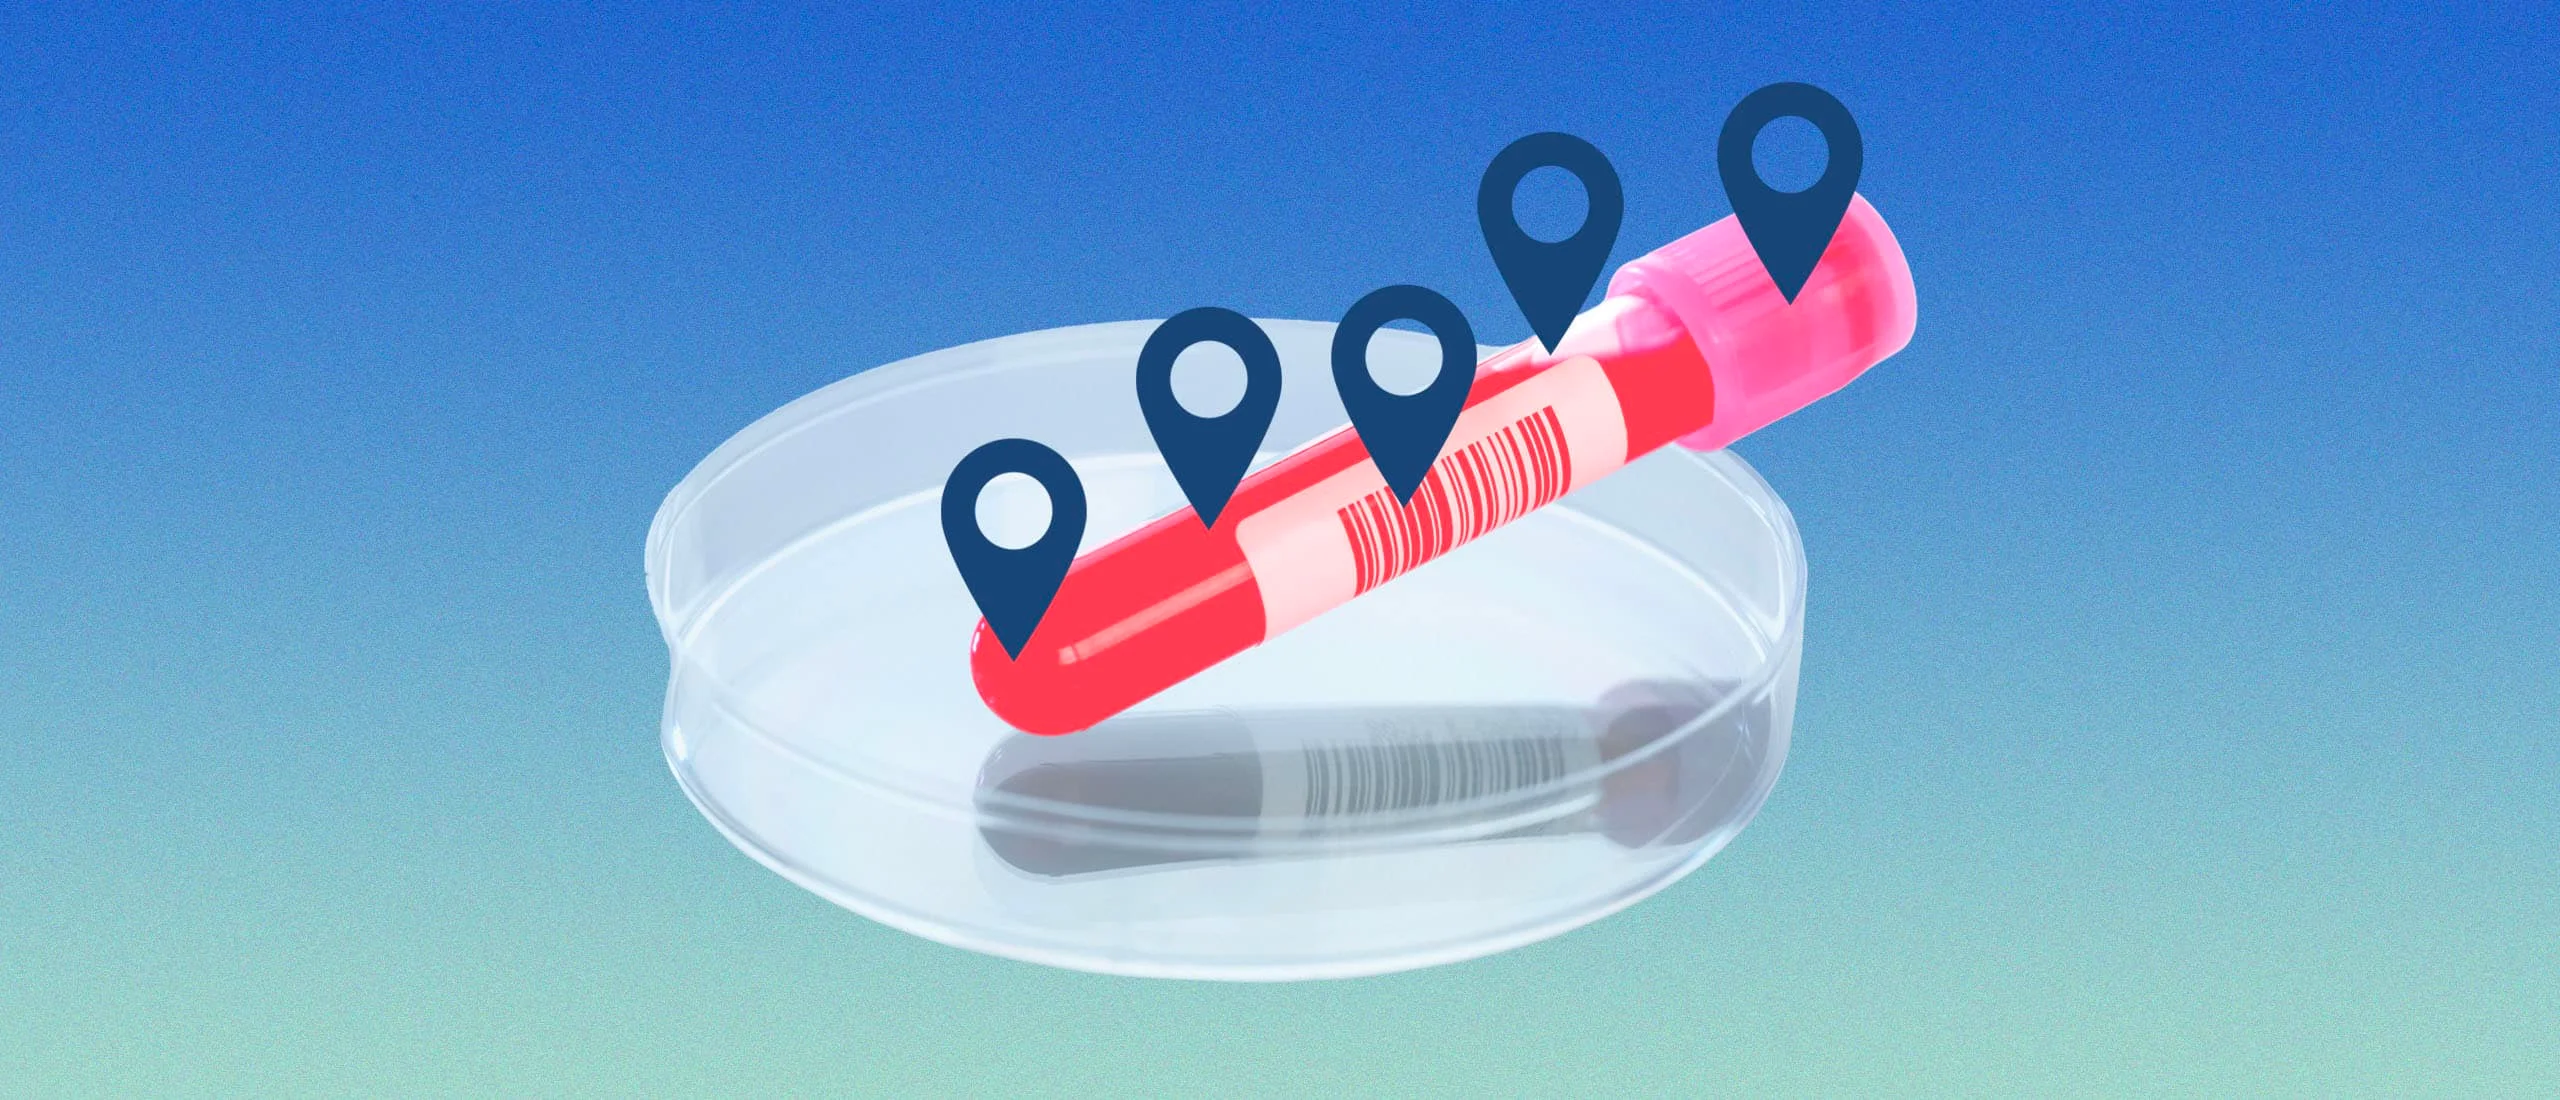 Blood test vial in petri dish with location markers